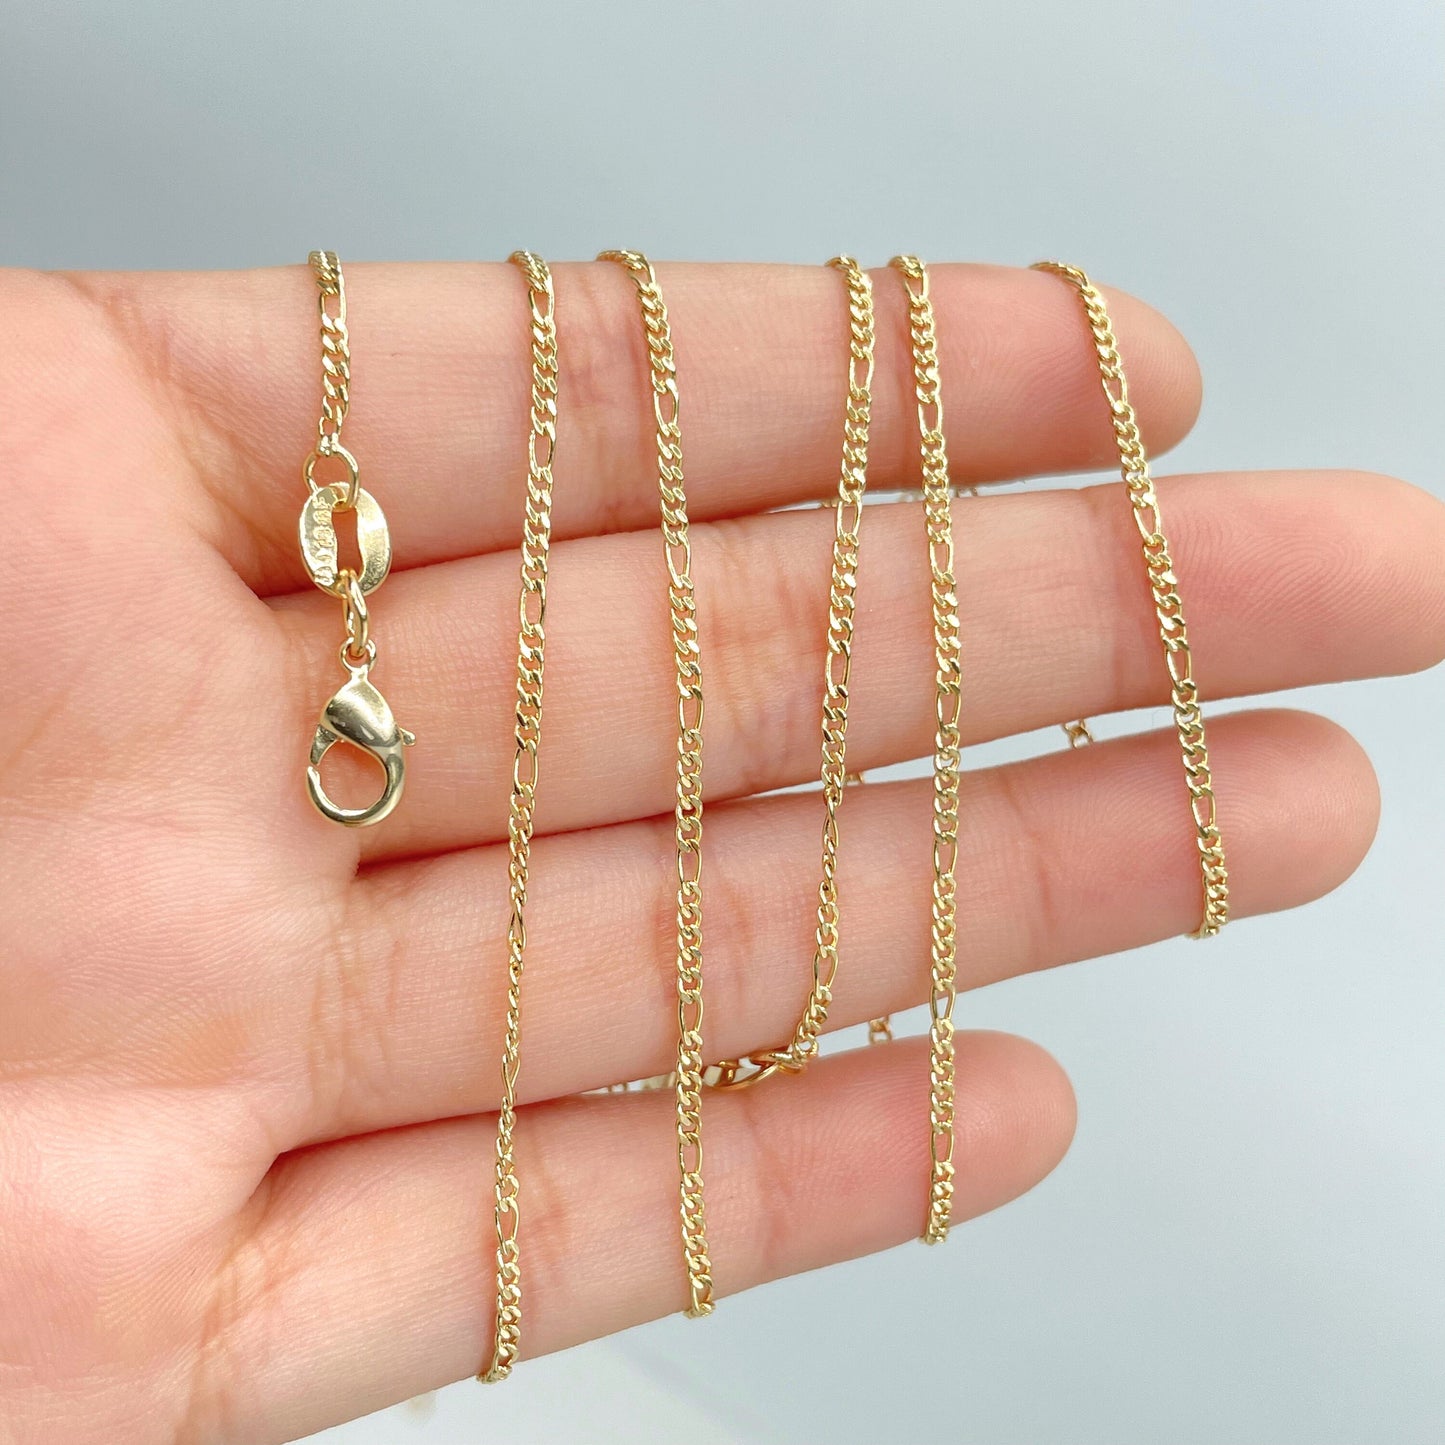 18k Gold Filled 1mm Figaro Link Dainty Chain, Available in 16'' 18'' 20'' or 24" Inches Long, Wholesale Jewelry Making Supplies